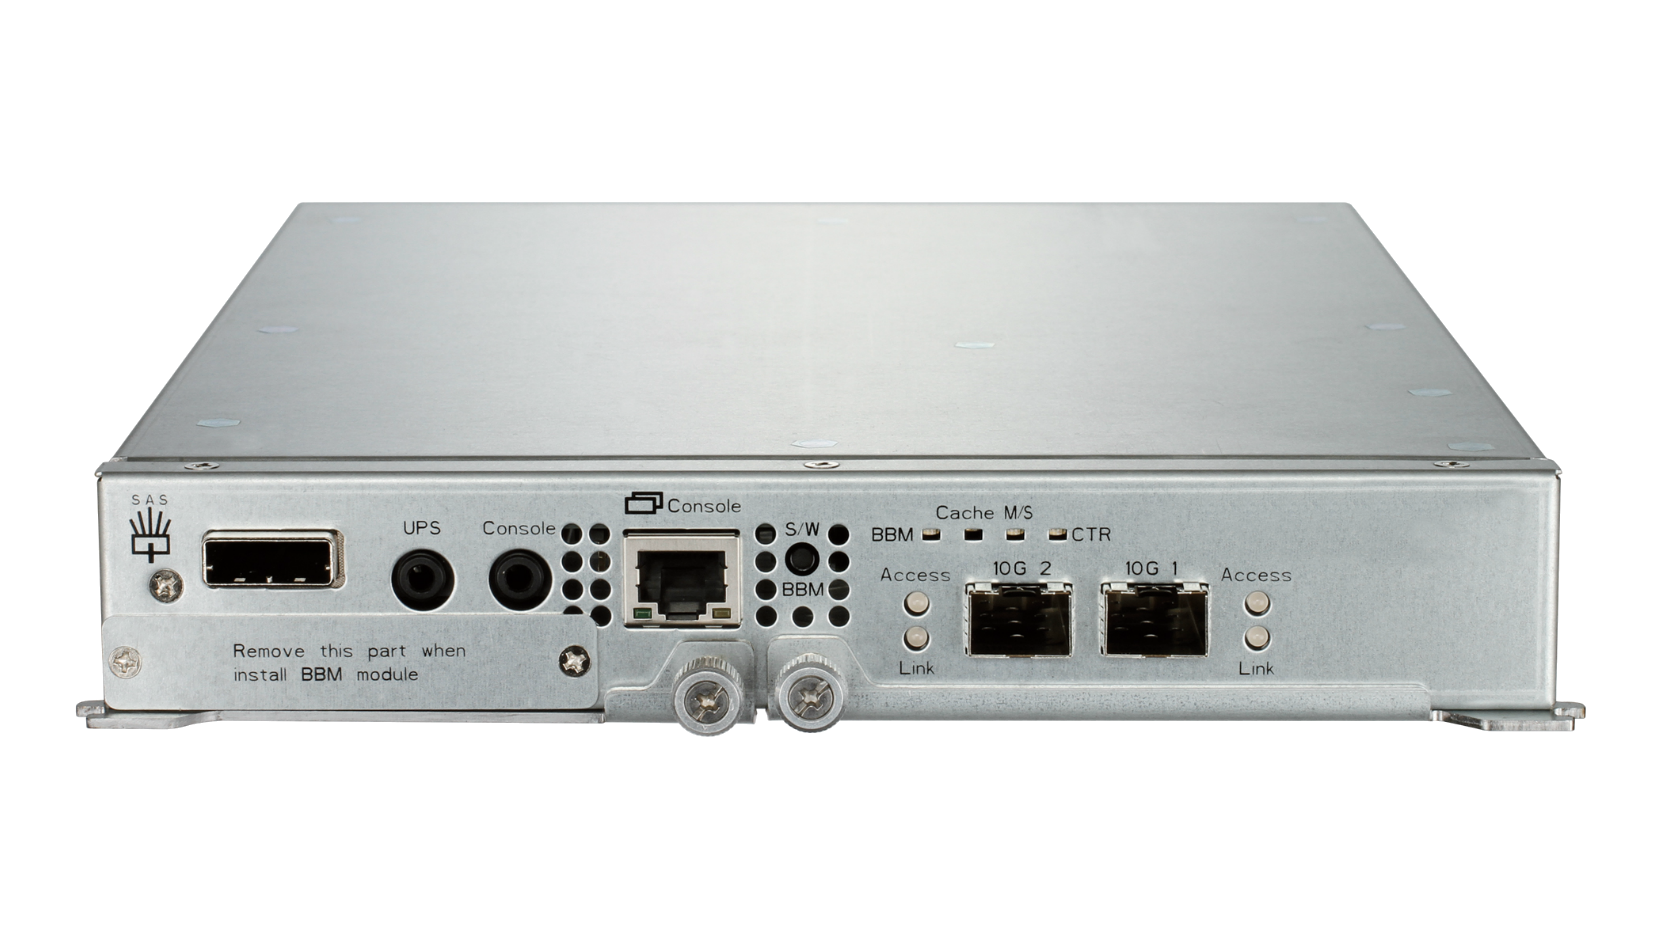 DSN-640 2x10GbE iSCSI SAN Controller with BBU for DSN-64xx Series | D ...